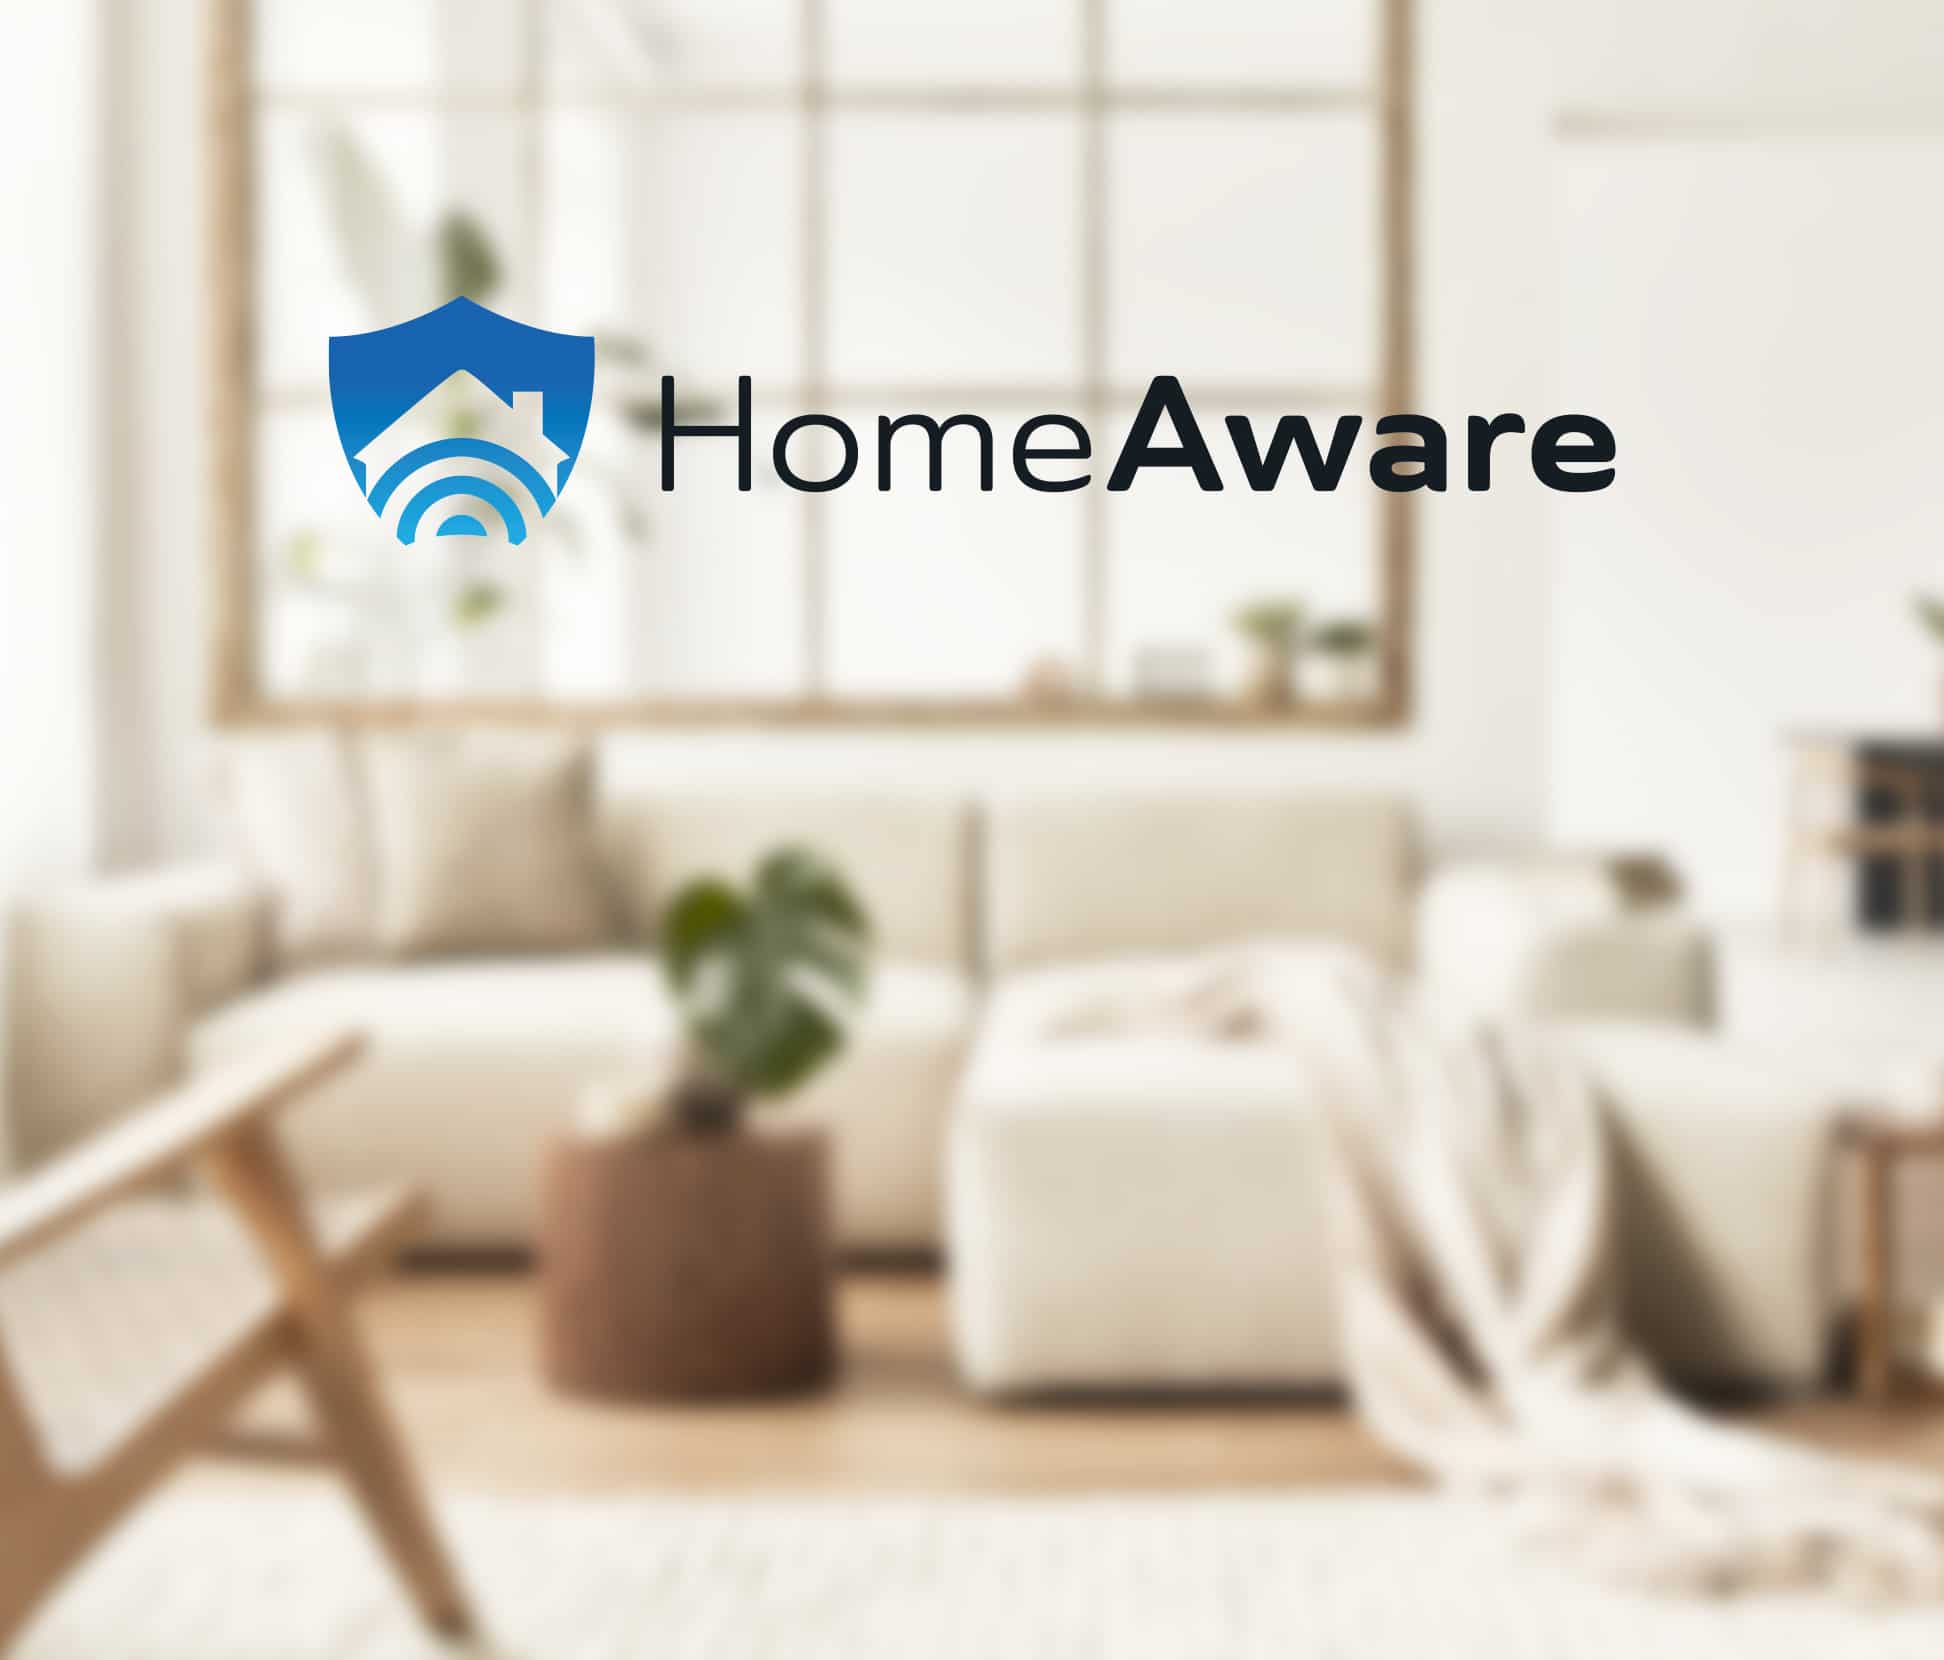 An image of a living room with the words "Home Aware"